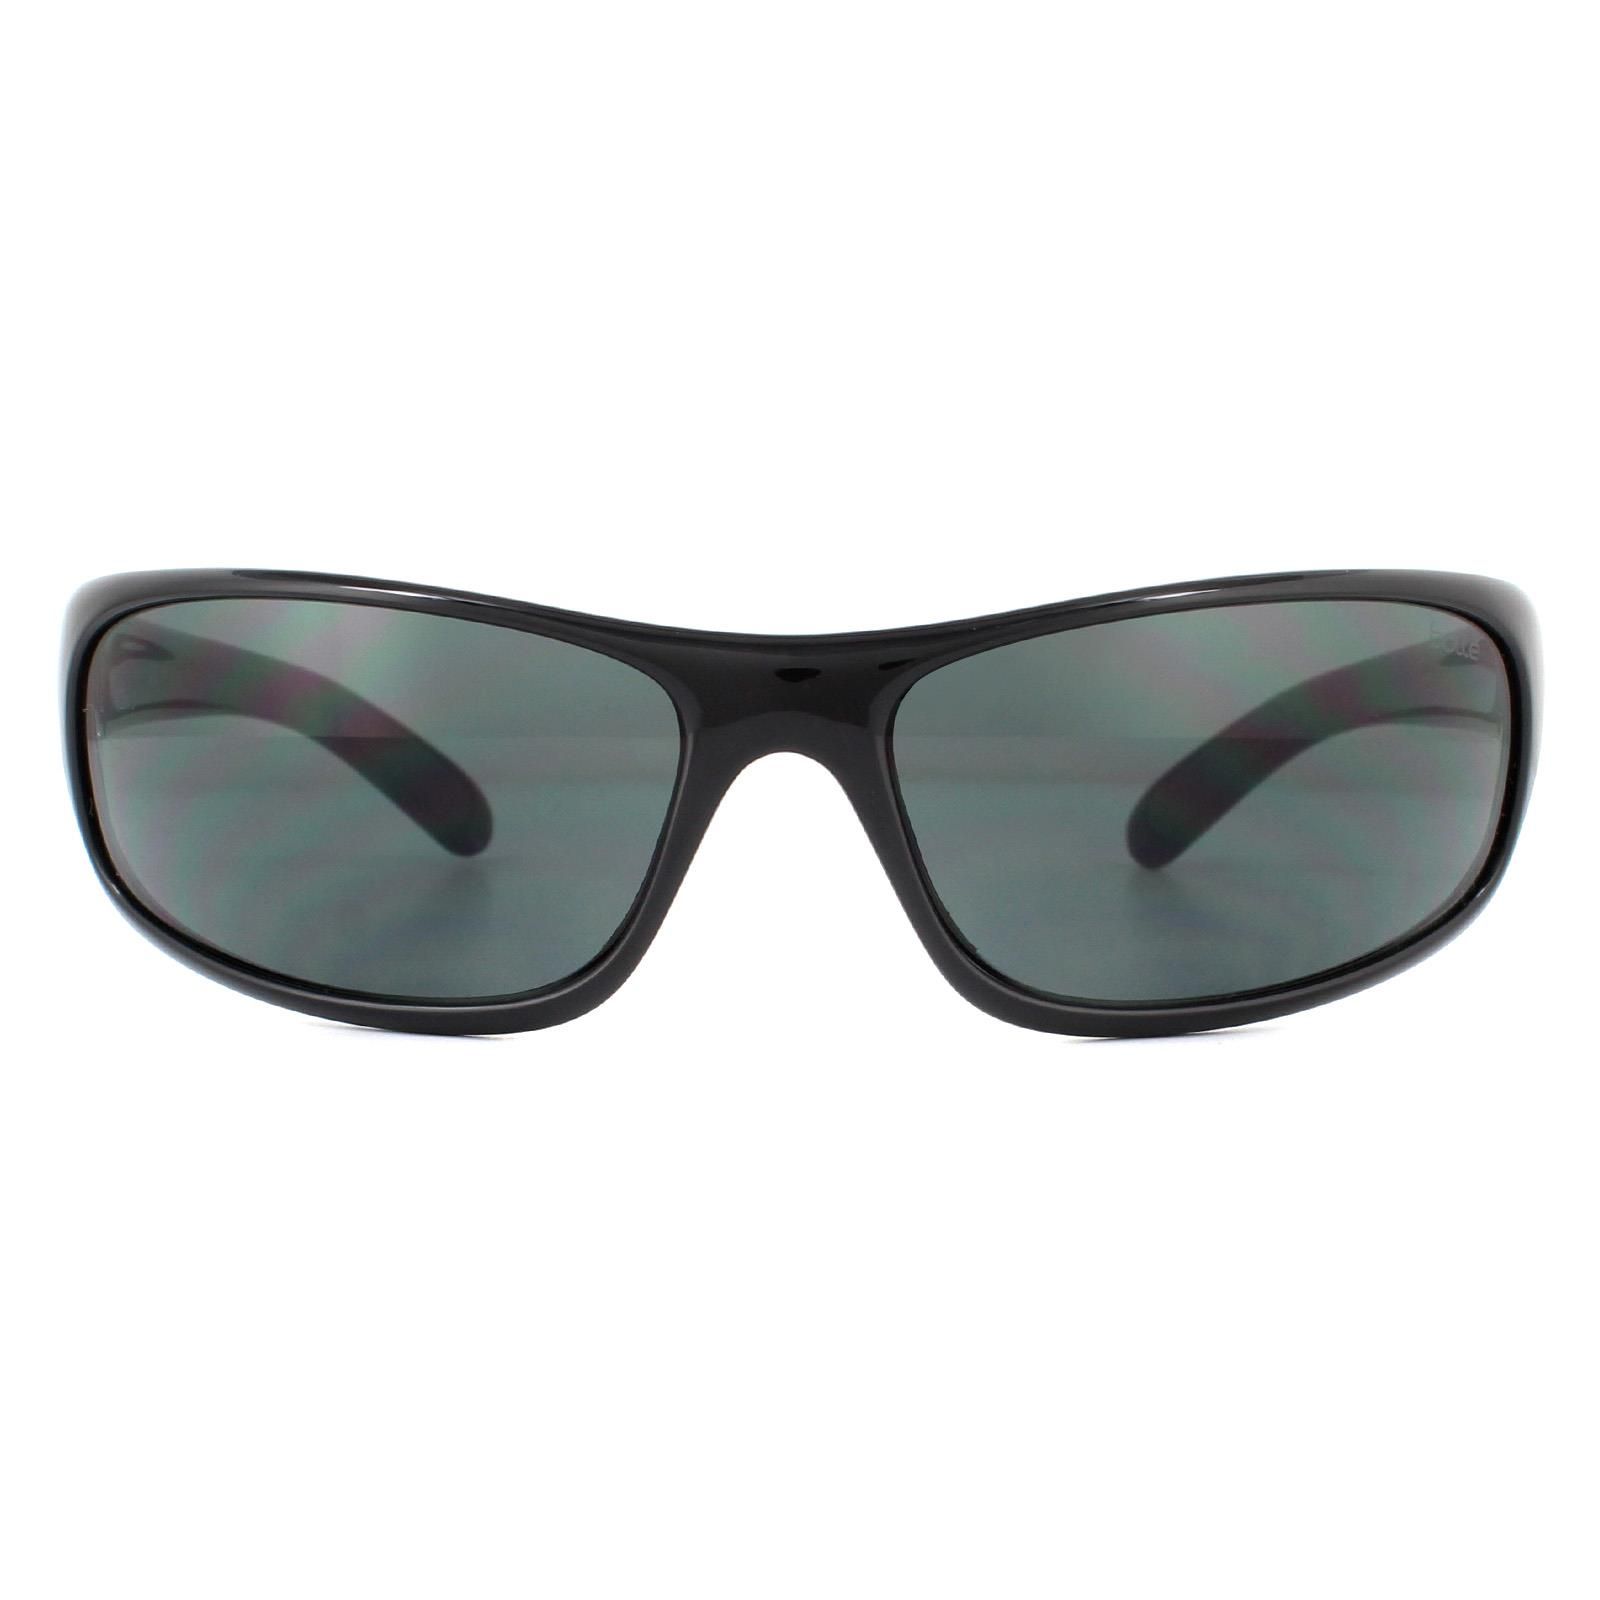 Bolle Sunglasses Anaconda 10339 Shiny Black TNS Grey are a sporty wrap around model with smooth sleek lines and featuring thermogrip temple tips and nose pads for added comfort